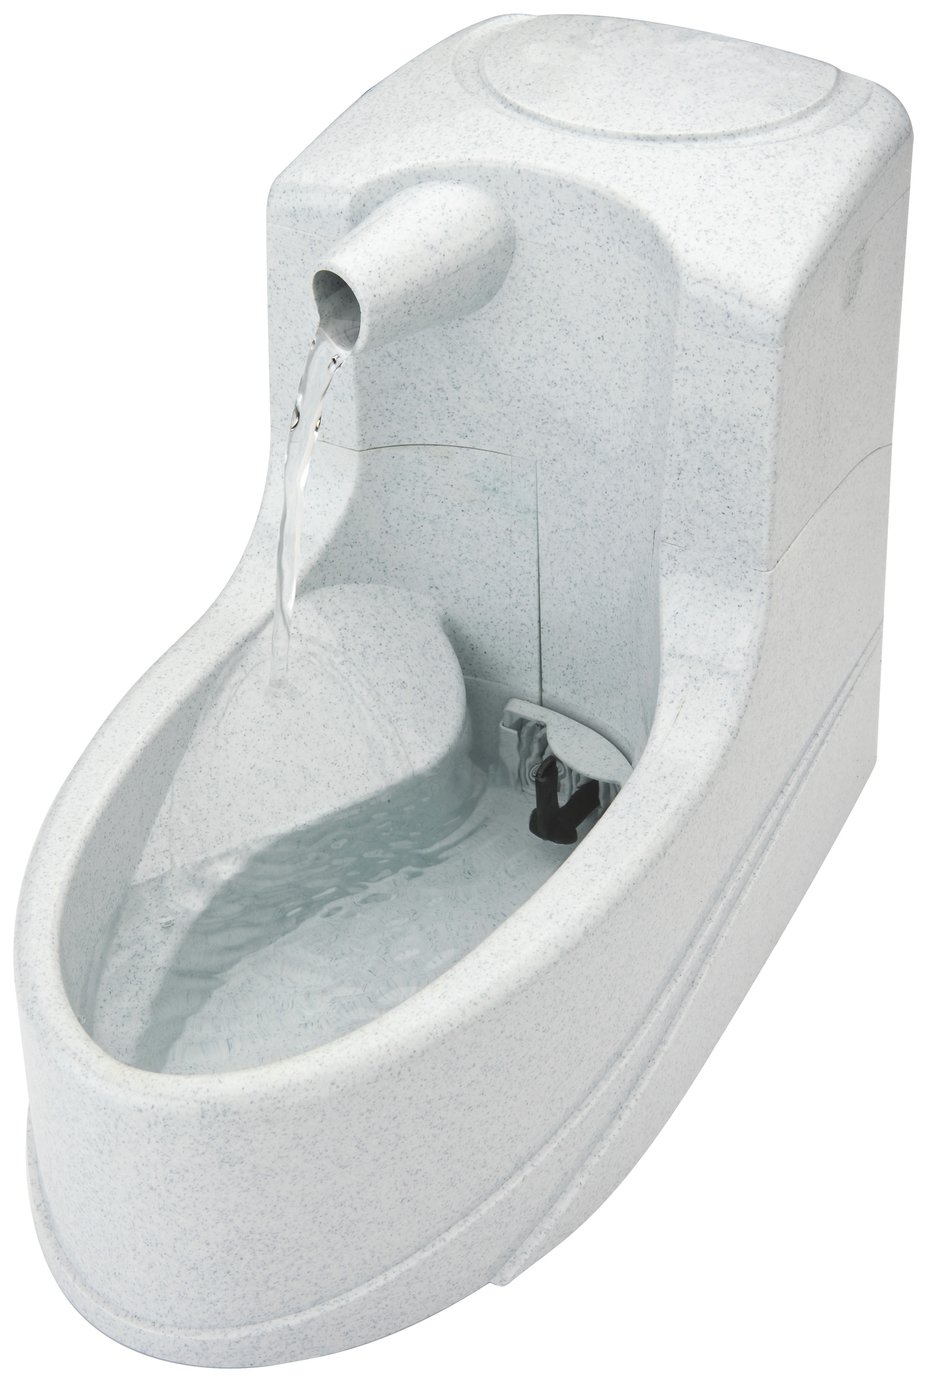 PetSafe Drinkwell Mini Dog and Cat Fountain